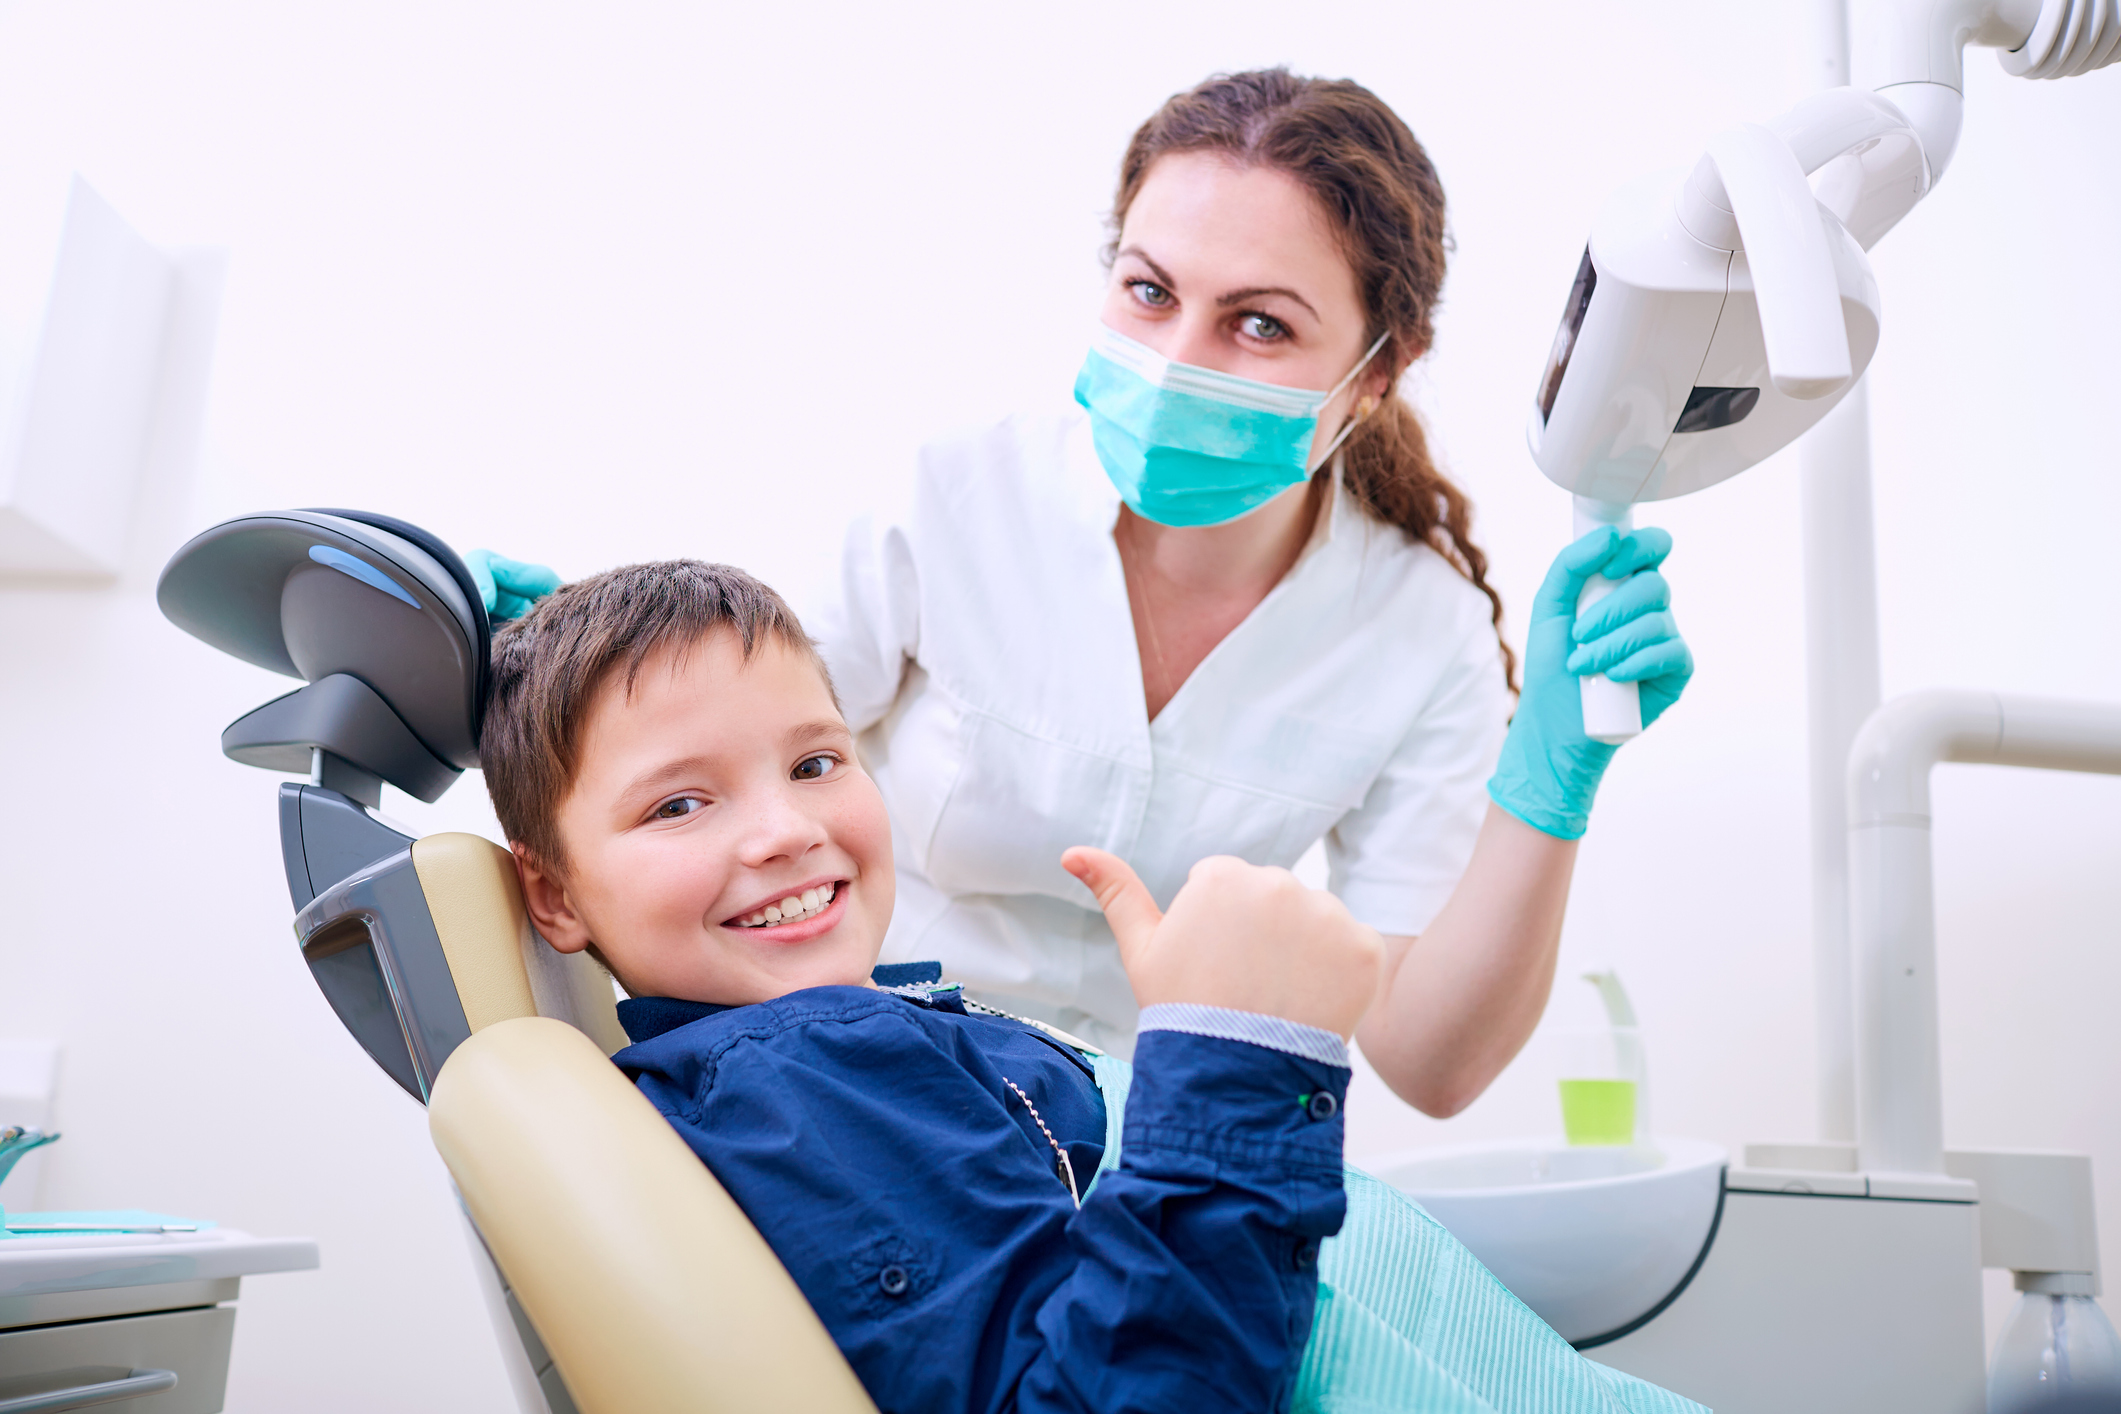 Dental Infections in Children Tied to Heart Disease Risk in Adults